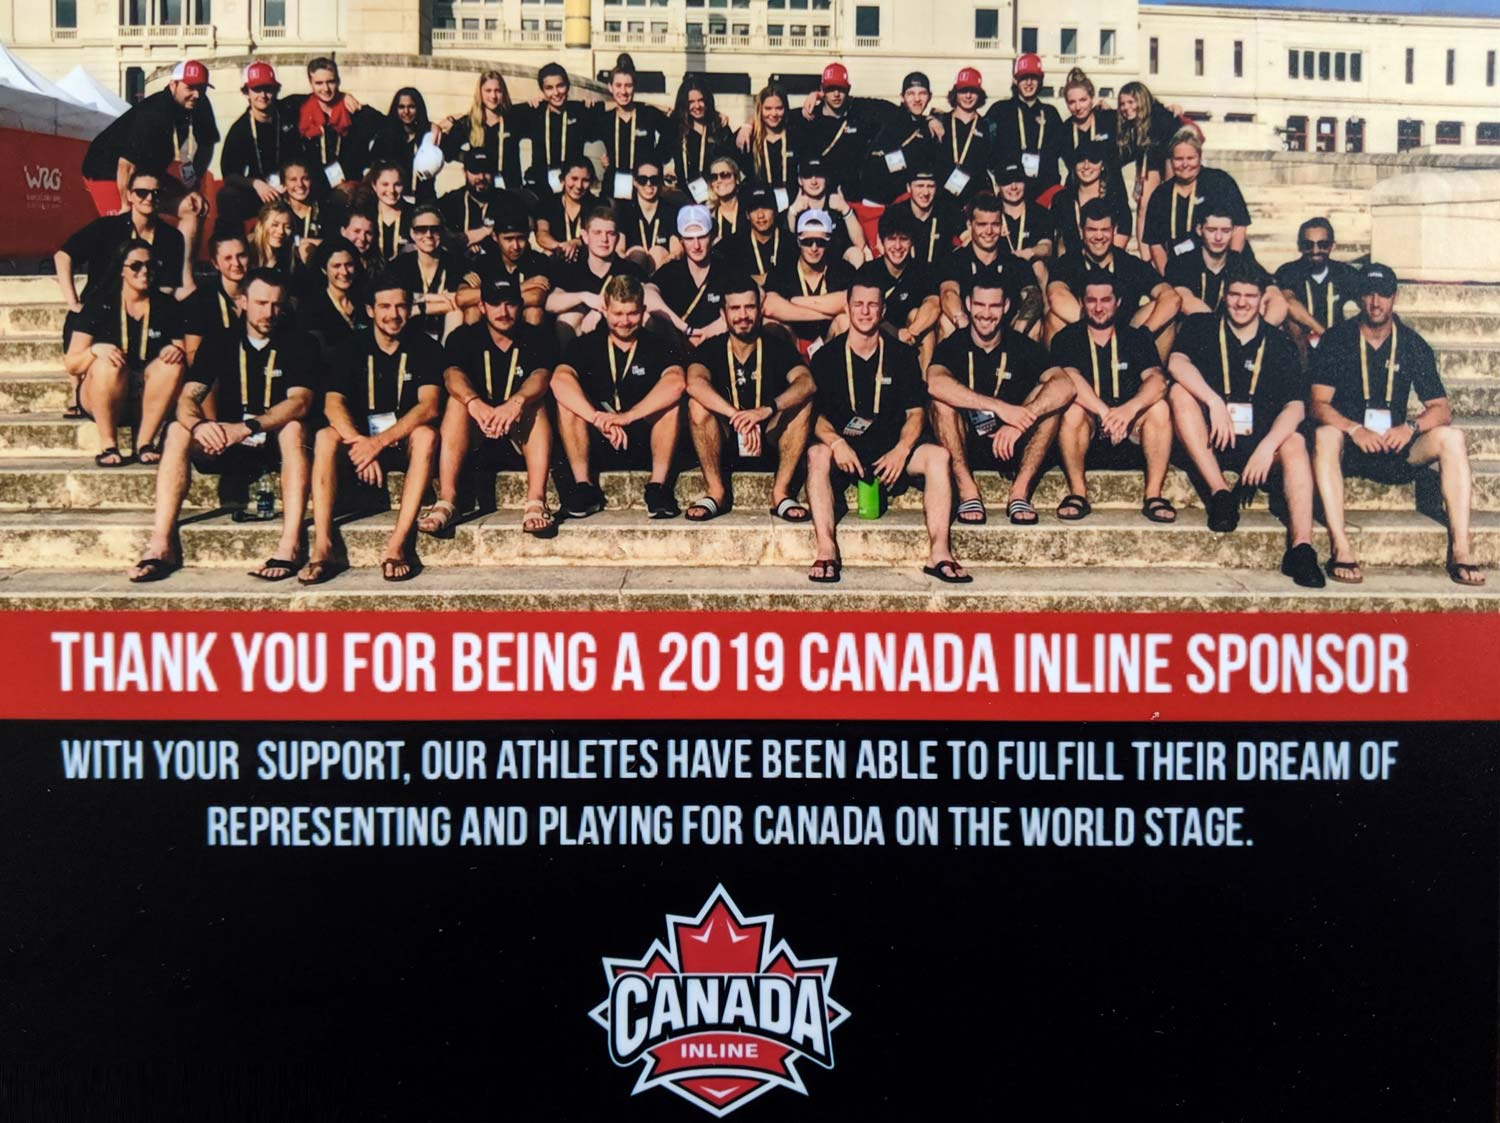 Thank you for being a 2019 Canada Inline Sponsor! With your support, our athletes have been able to fulfill their dream of representing and playing for Canada on the world stage.